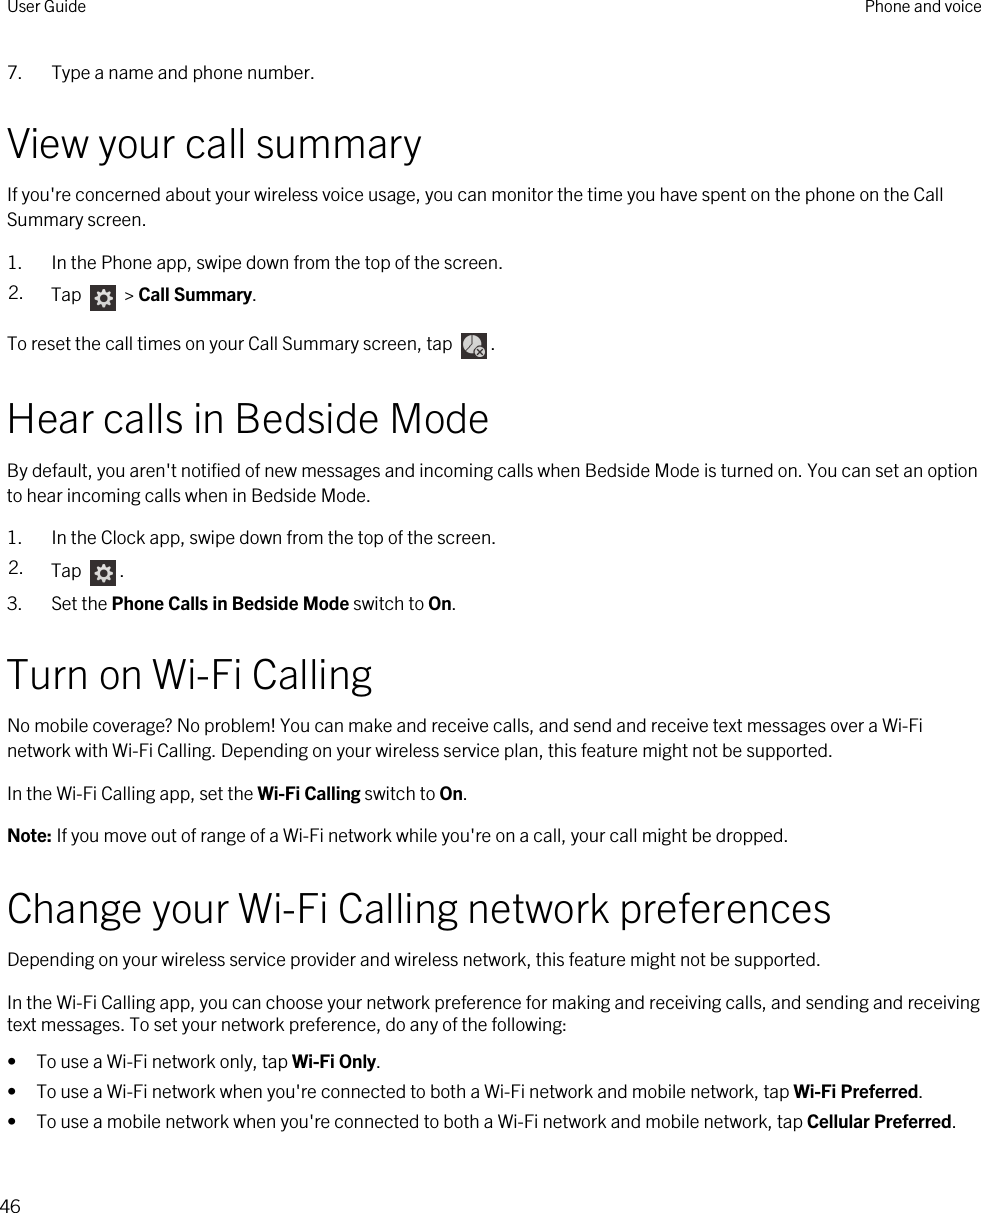 7. Type a name and phone number.View your call summaryIf you&apos;re concerned about your wireless voice usage, you can monitor the time you have spent on the phone on the Call Summary screen.1. In the Phone app, swipe down from the top of the screen.2. Tap   &gt; Call Summary.To reset the call times on your Call Summary screen, tap  .Hear calls in Bedside ModeBy default, you aren&apos;t notified of new messages and incoming calls when Bedside Mode is turned on. You can set an option to hear incoming calls when in Bedside Mode.1. In the Clock app, swipe down from the top of the screen.2. Tap  .3. Set the Phone Calls in Bedside Mode switch to On.Turn on Wi-Fi CallingNo mobile coverage? No problem! You can make and receive calls, and send and receive text messages over a Wi-Fi network with Wi-Fi Calling. Depending on your wireless service plan, this feature might not be supported.In the Wi-Fi Calling app, set the Wi-Fi Calling switch to On.Note: If you move out of range of a Wi-Fi network while you&apos;re on a call, your call might be dropped.Change your Wi-Fi Calling network preferencesDepending on your wireless service provider and wireless network, this feature might not be supported.In the Wi-Fi Calling app, you can choose your network preference for making and receiving calls, and sending and receiving text messages. To set your network preference, do any of the following:• To use a Wi-Fi network only, tap Wi-Fi Only.• To use a Wi-Fi network when you&apos;re connected to both a Wi-Fi network and mobile network, tap Wi-Fi Preferred.• To use a mobile network when you&apos;re connected to both a Wi-Fi network and mobile network, tap Cellular Preferred.User Guide Phone and voice46